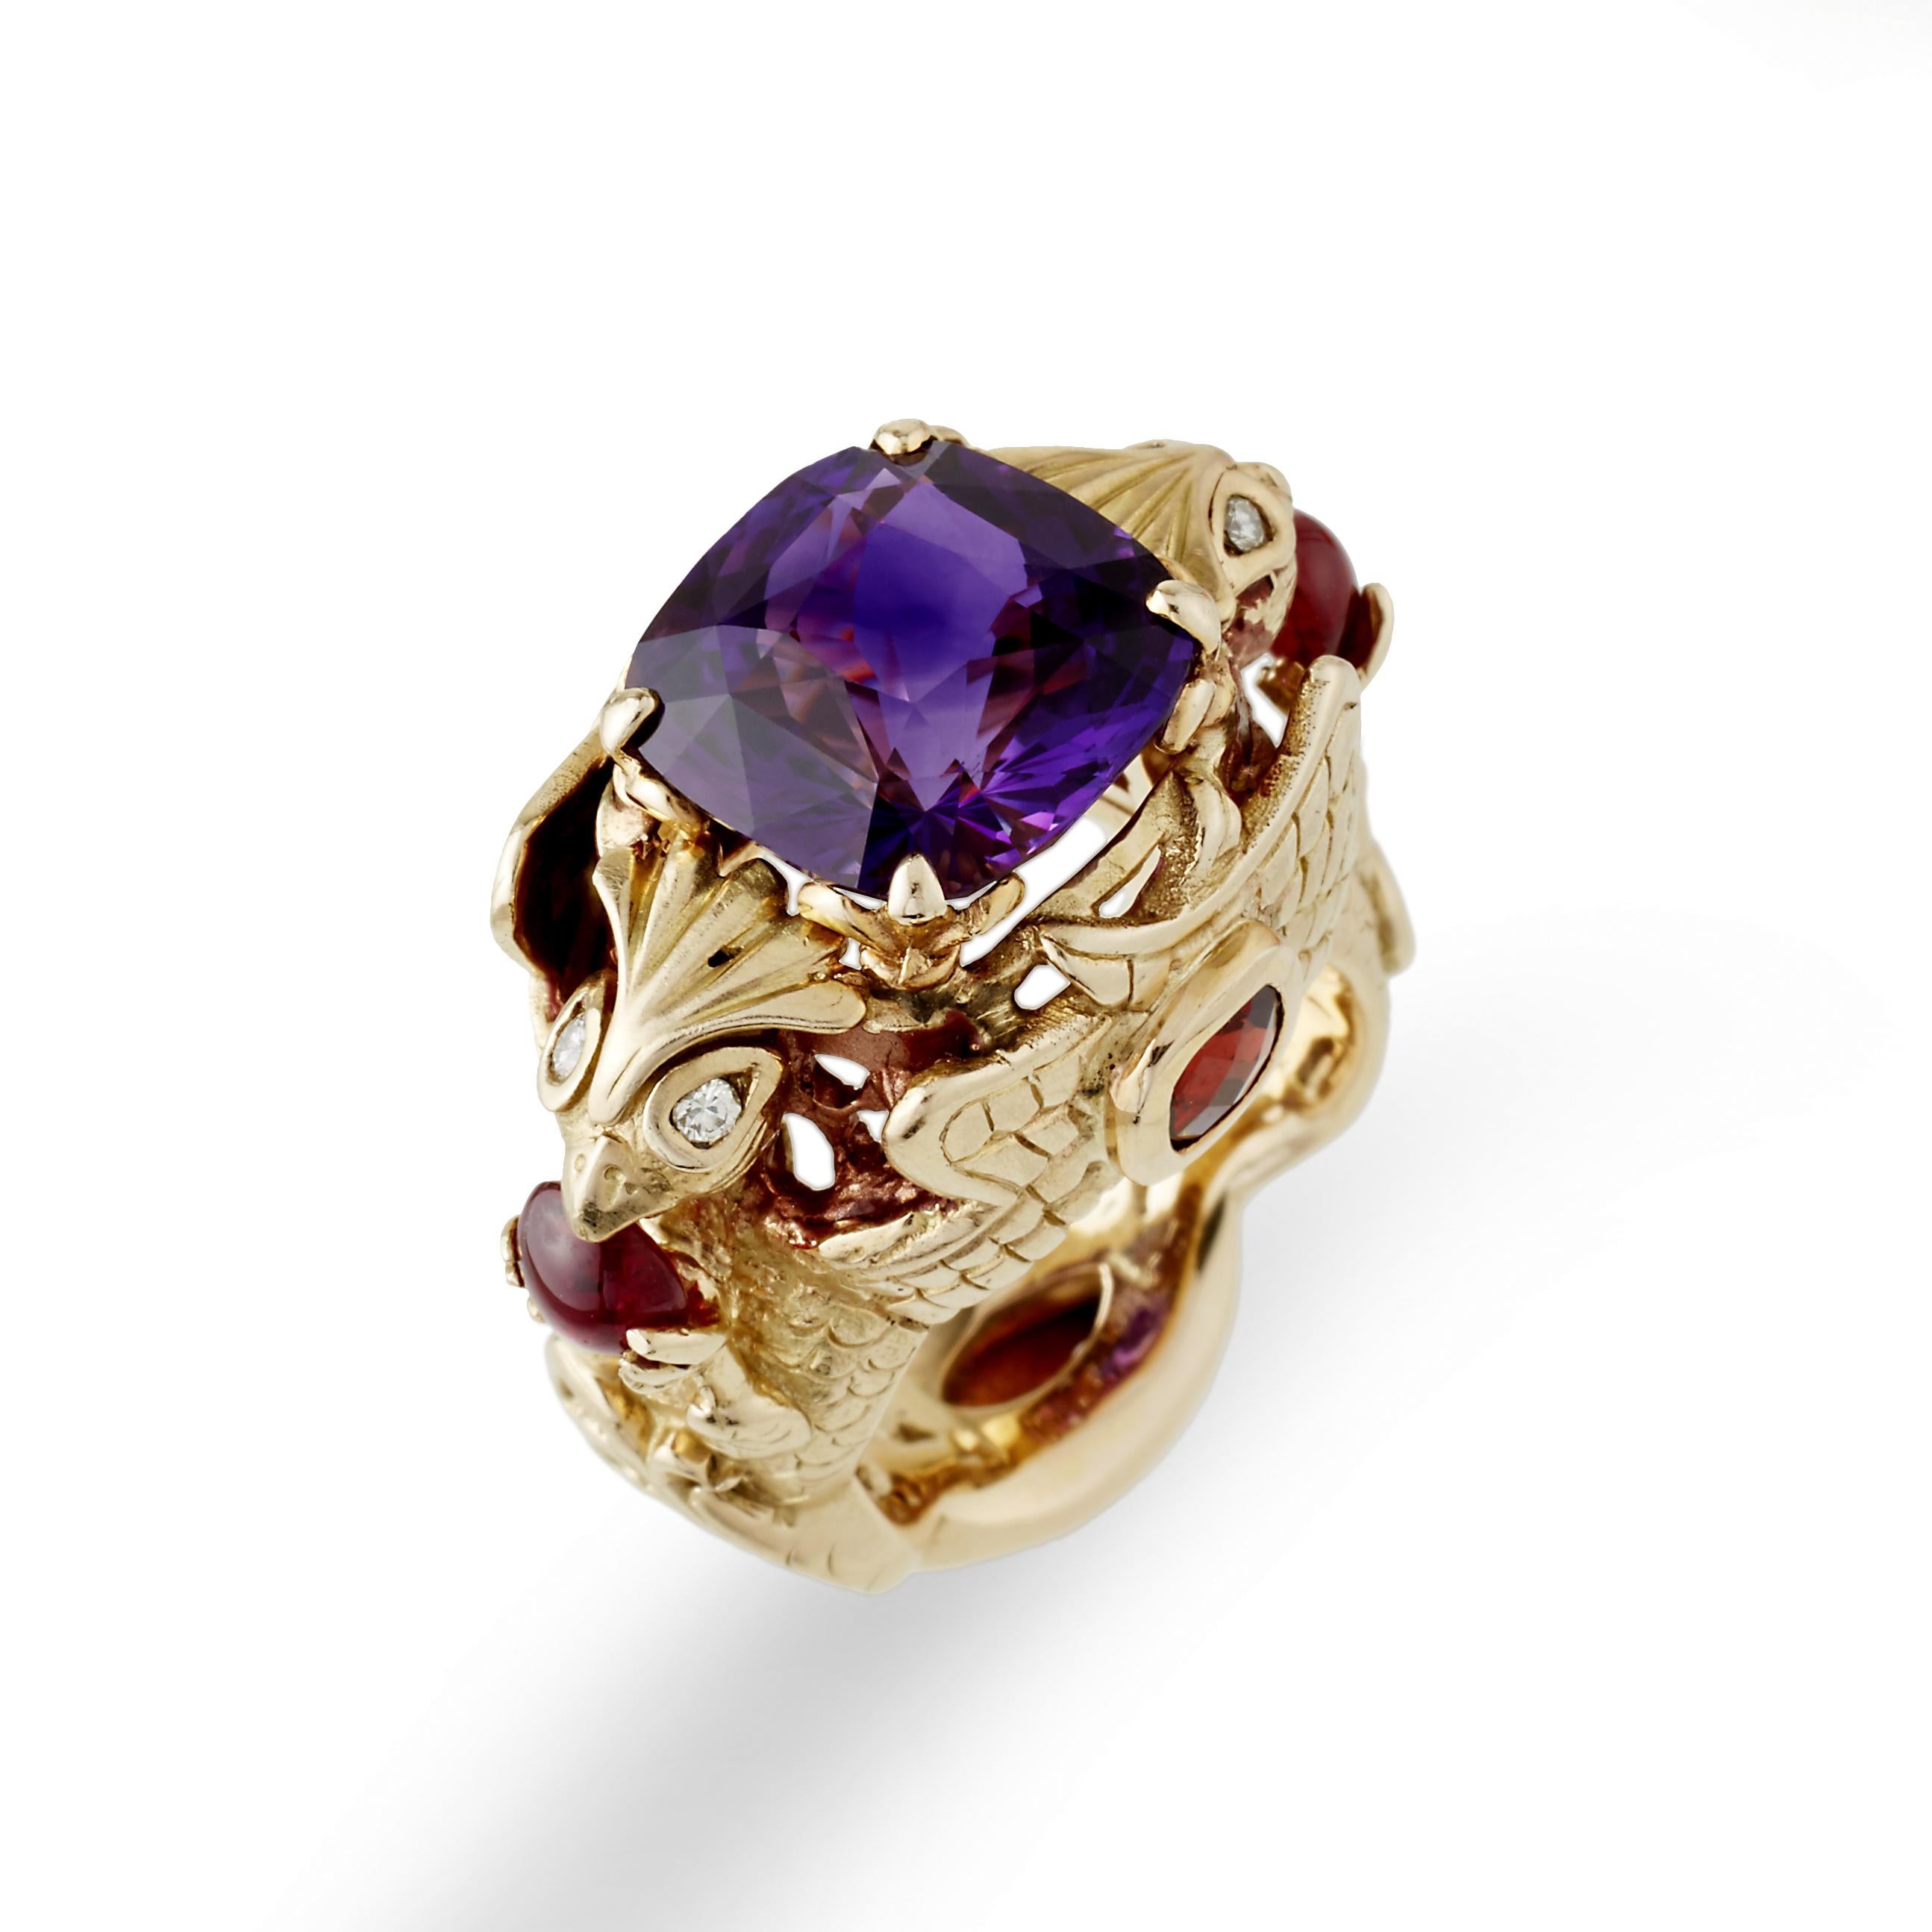 A spirit of love rising your heart, joy surrounds you and this spectacular Russian Purple Cushion Amethyst, Set with garnets and rubies. 18kt yellow gold - live each day with passion!!!

A wonderful conversation piece!